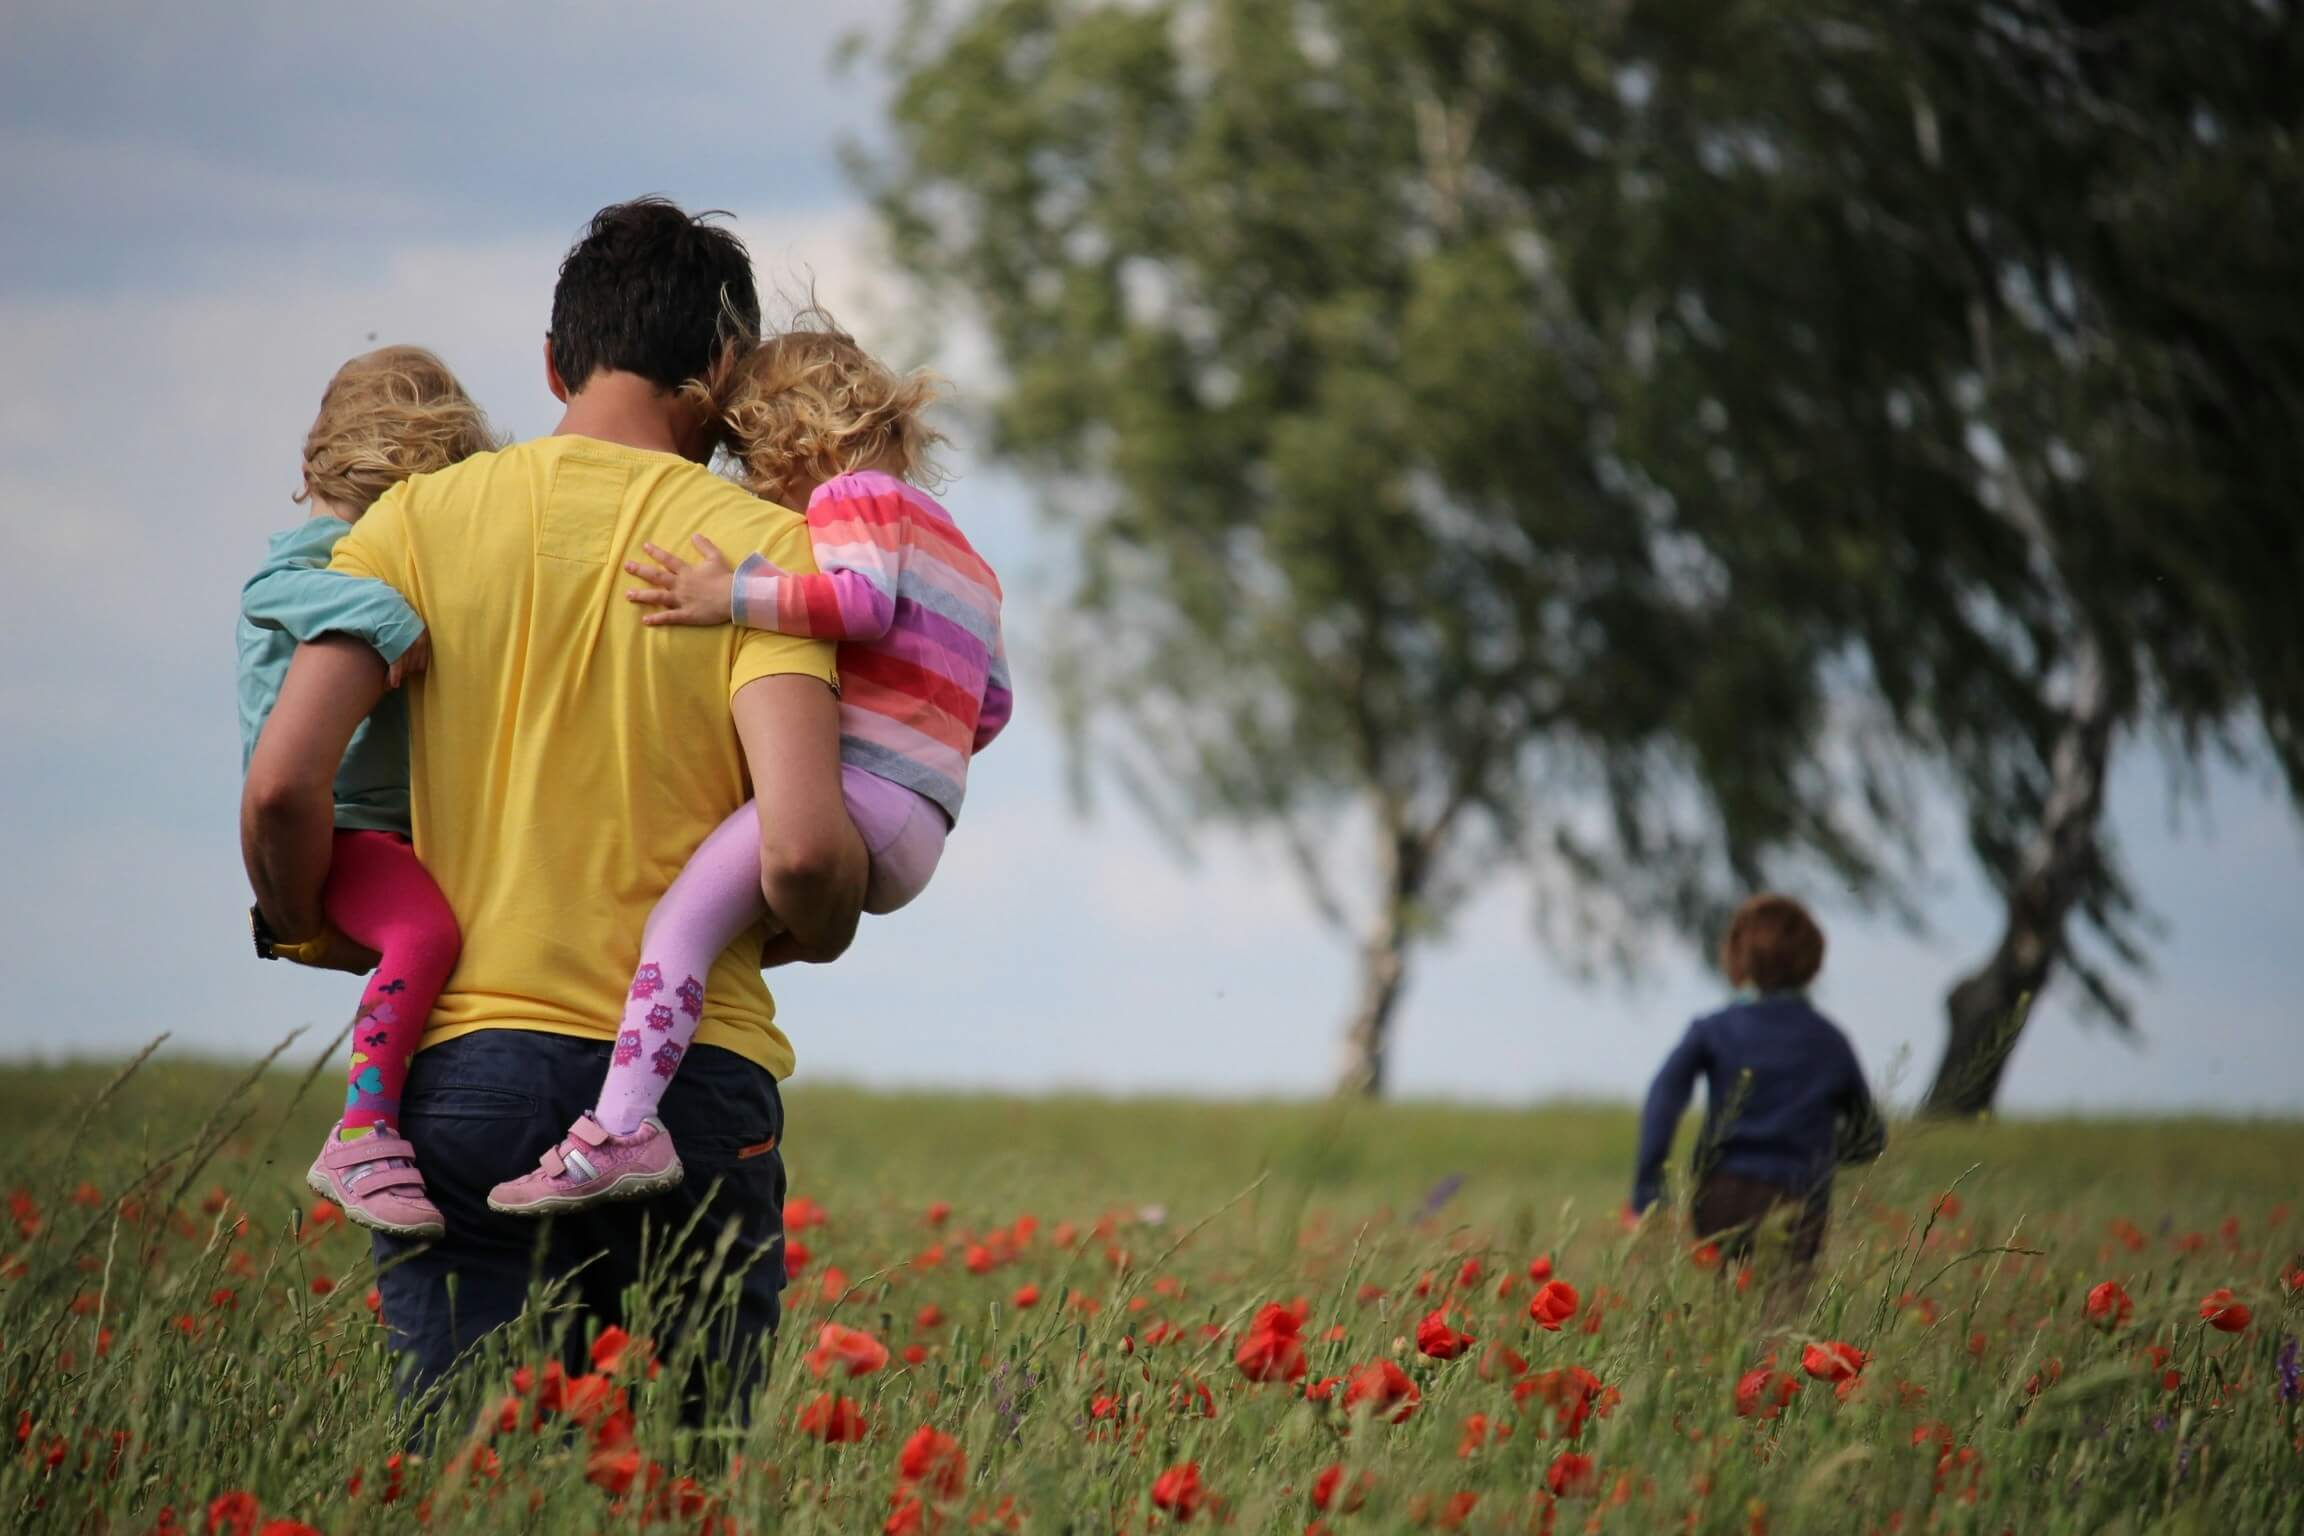 man holding two girls in a field of red flowers and boy running